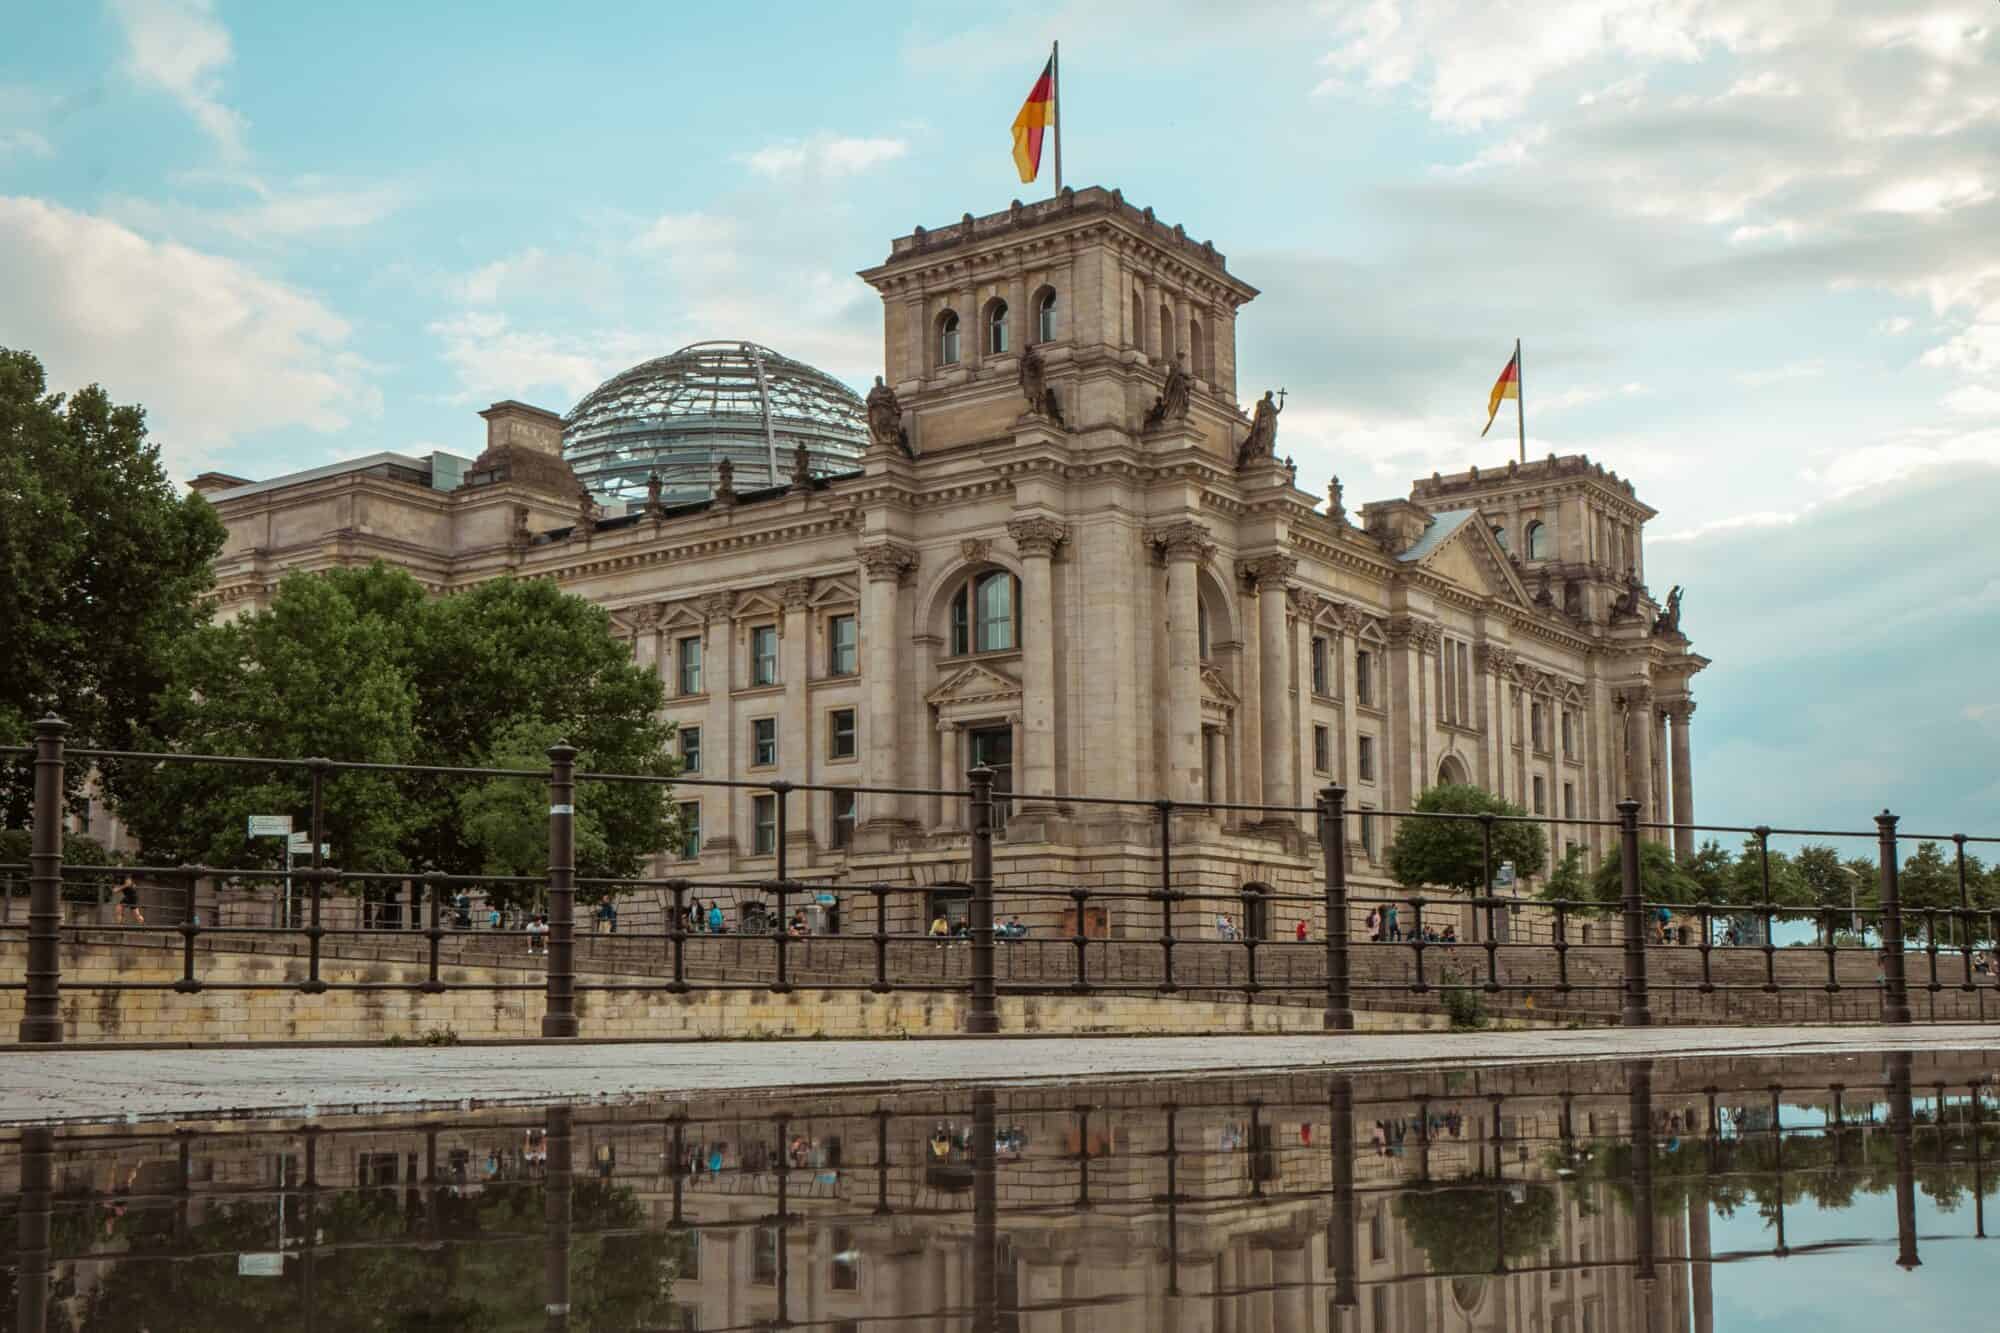 A photo of the German Reichstag building where the Bundestag parliament is seated in Berlin.